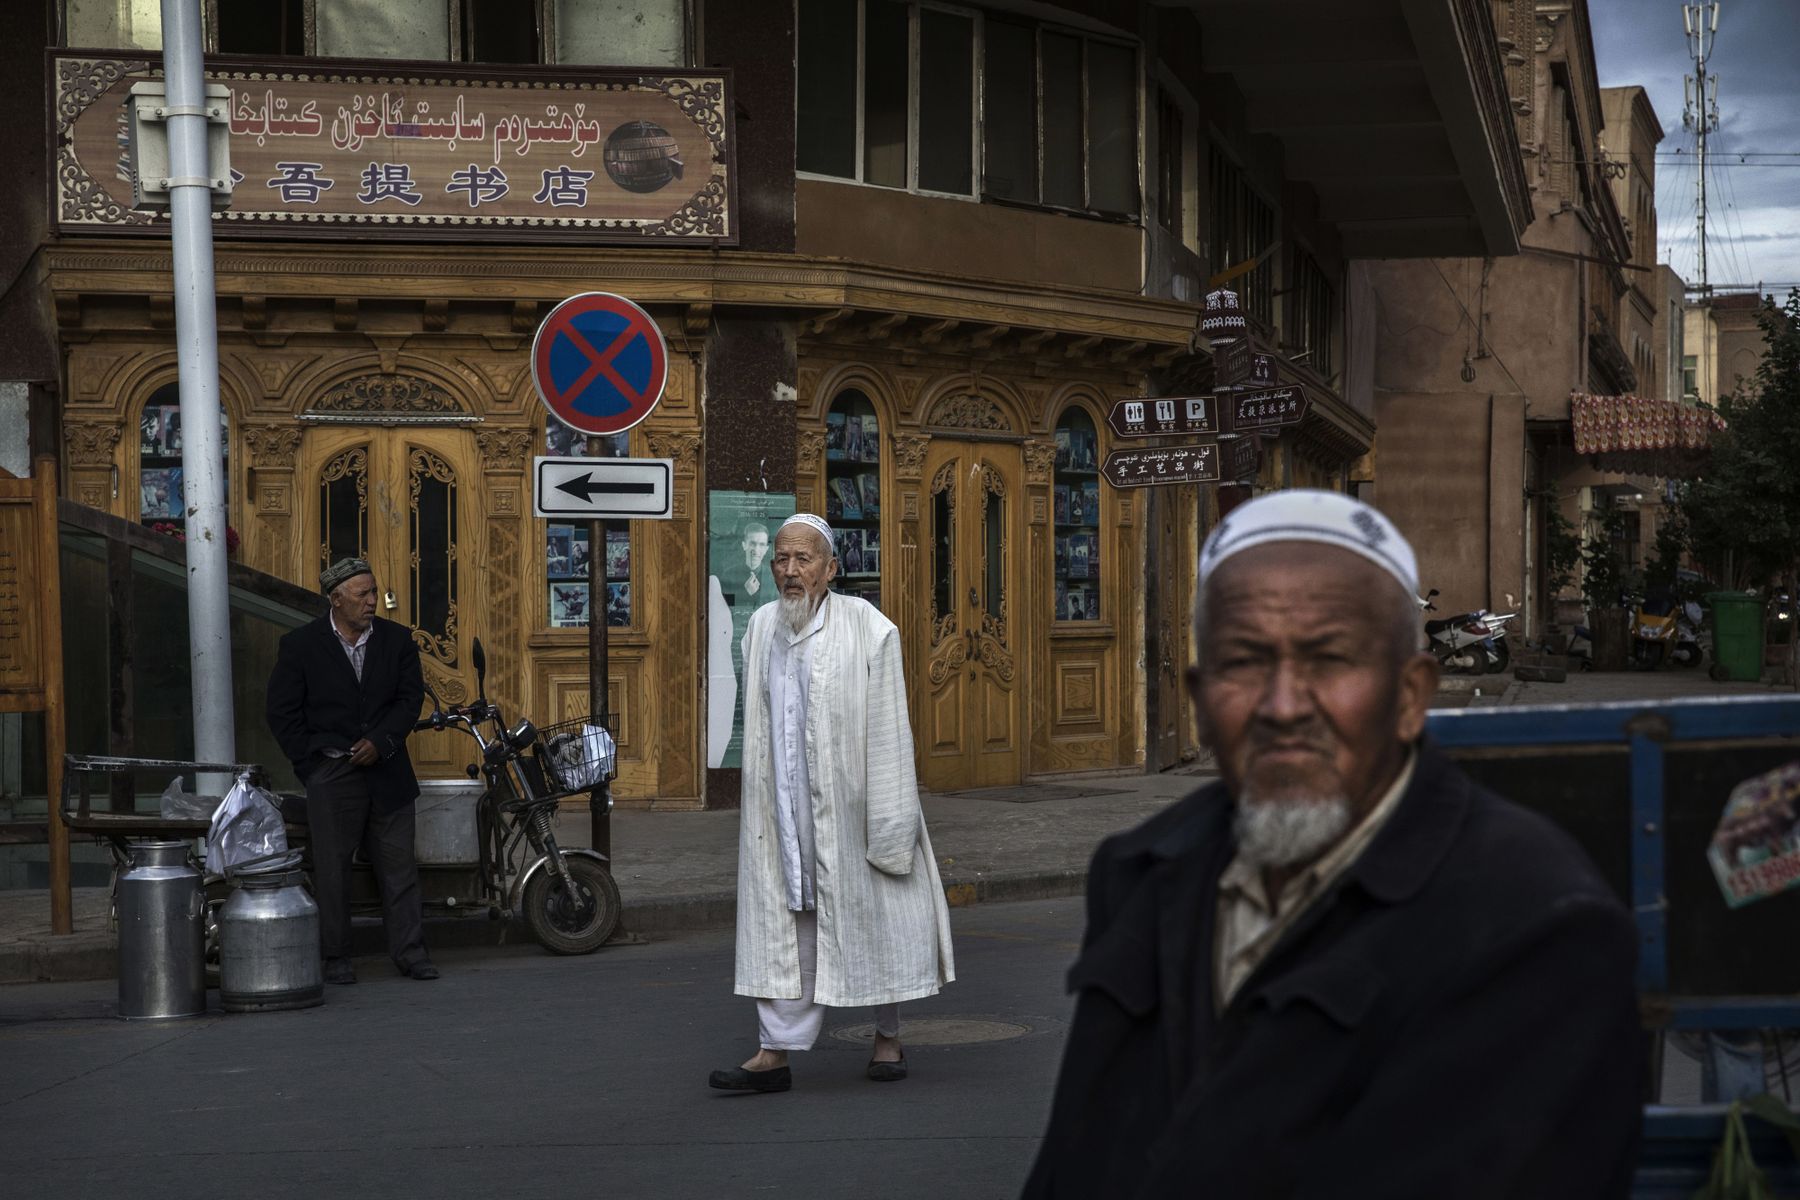 Muslim Governments Silent as China Cracks Down on Uighurs